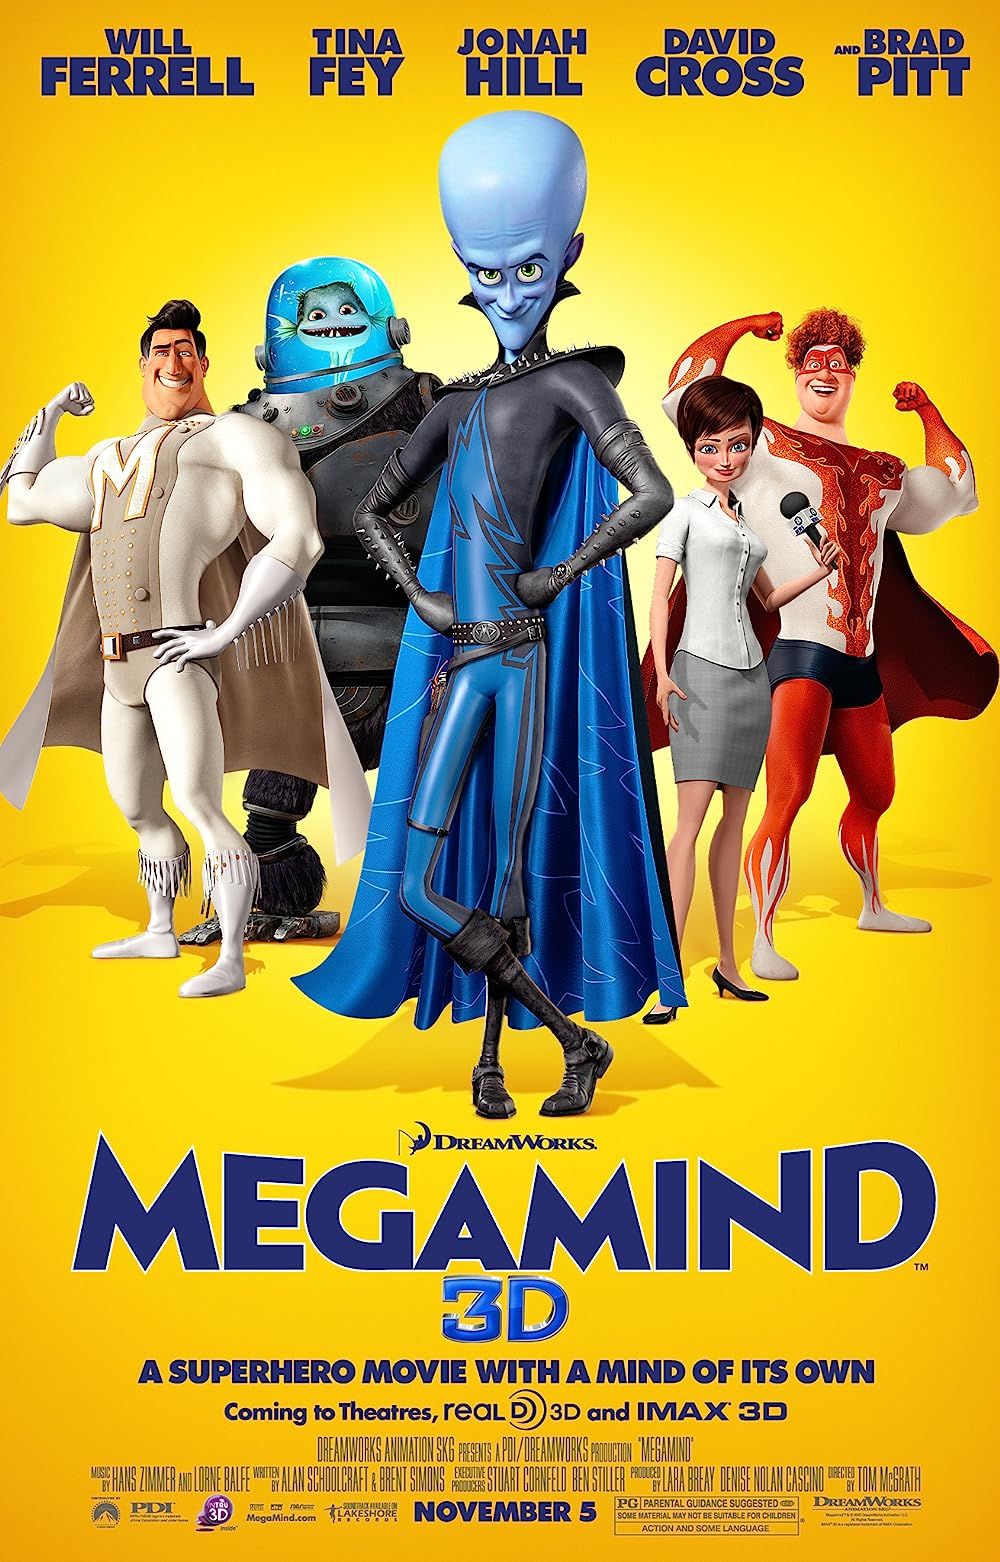 The Cast Stand Together on the Megamind Promo